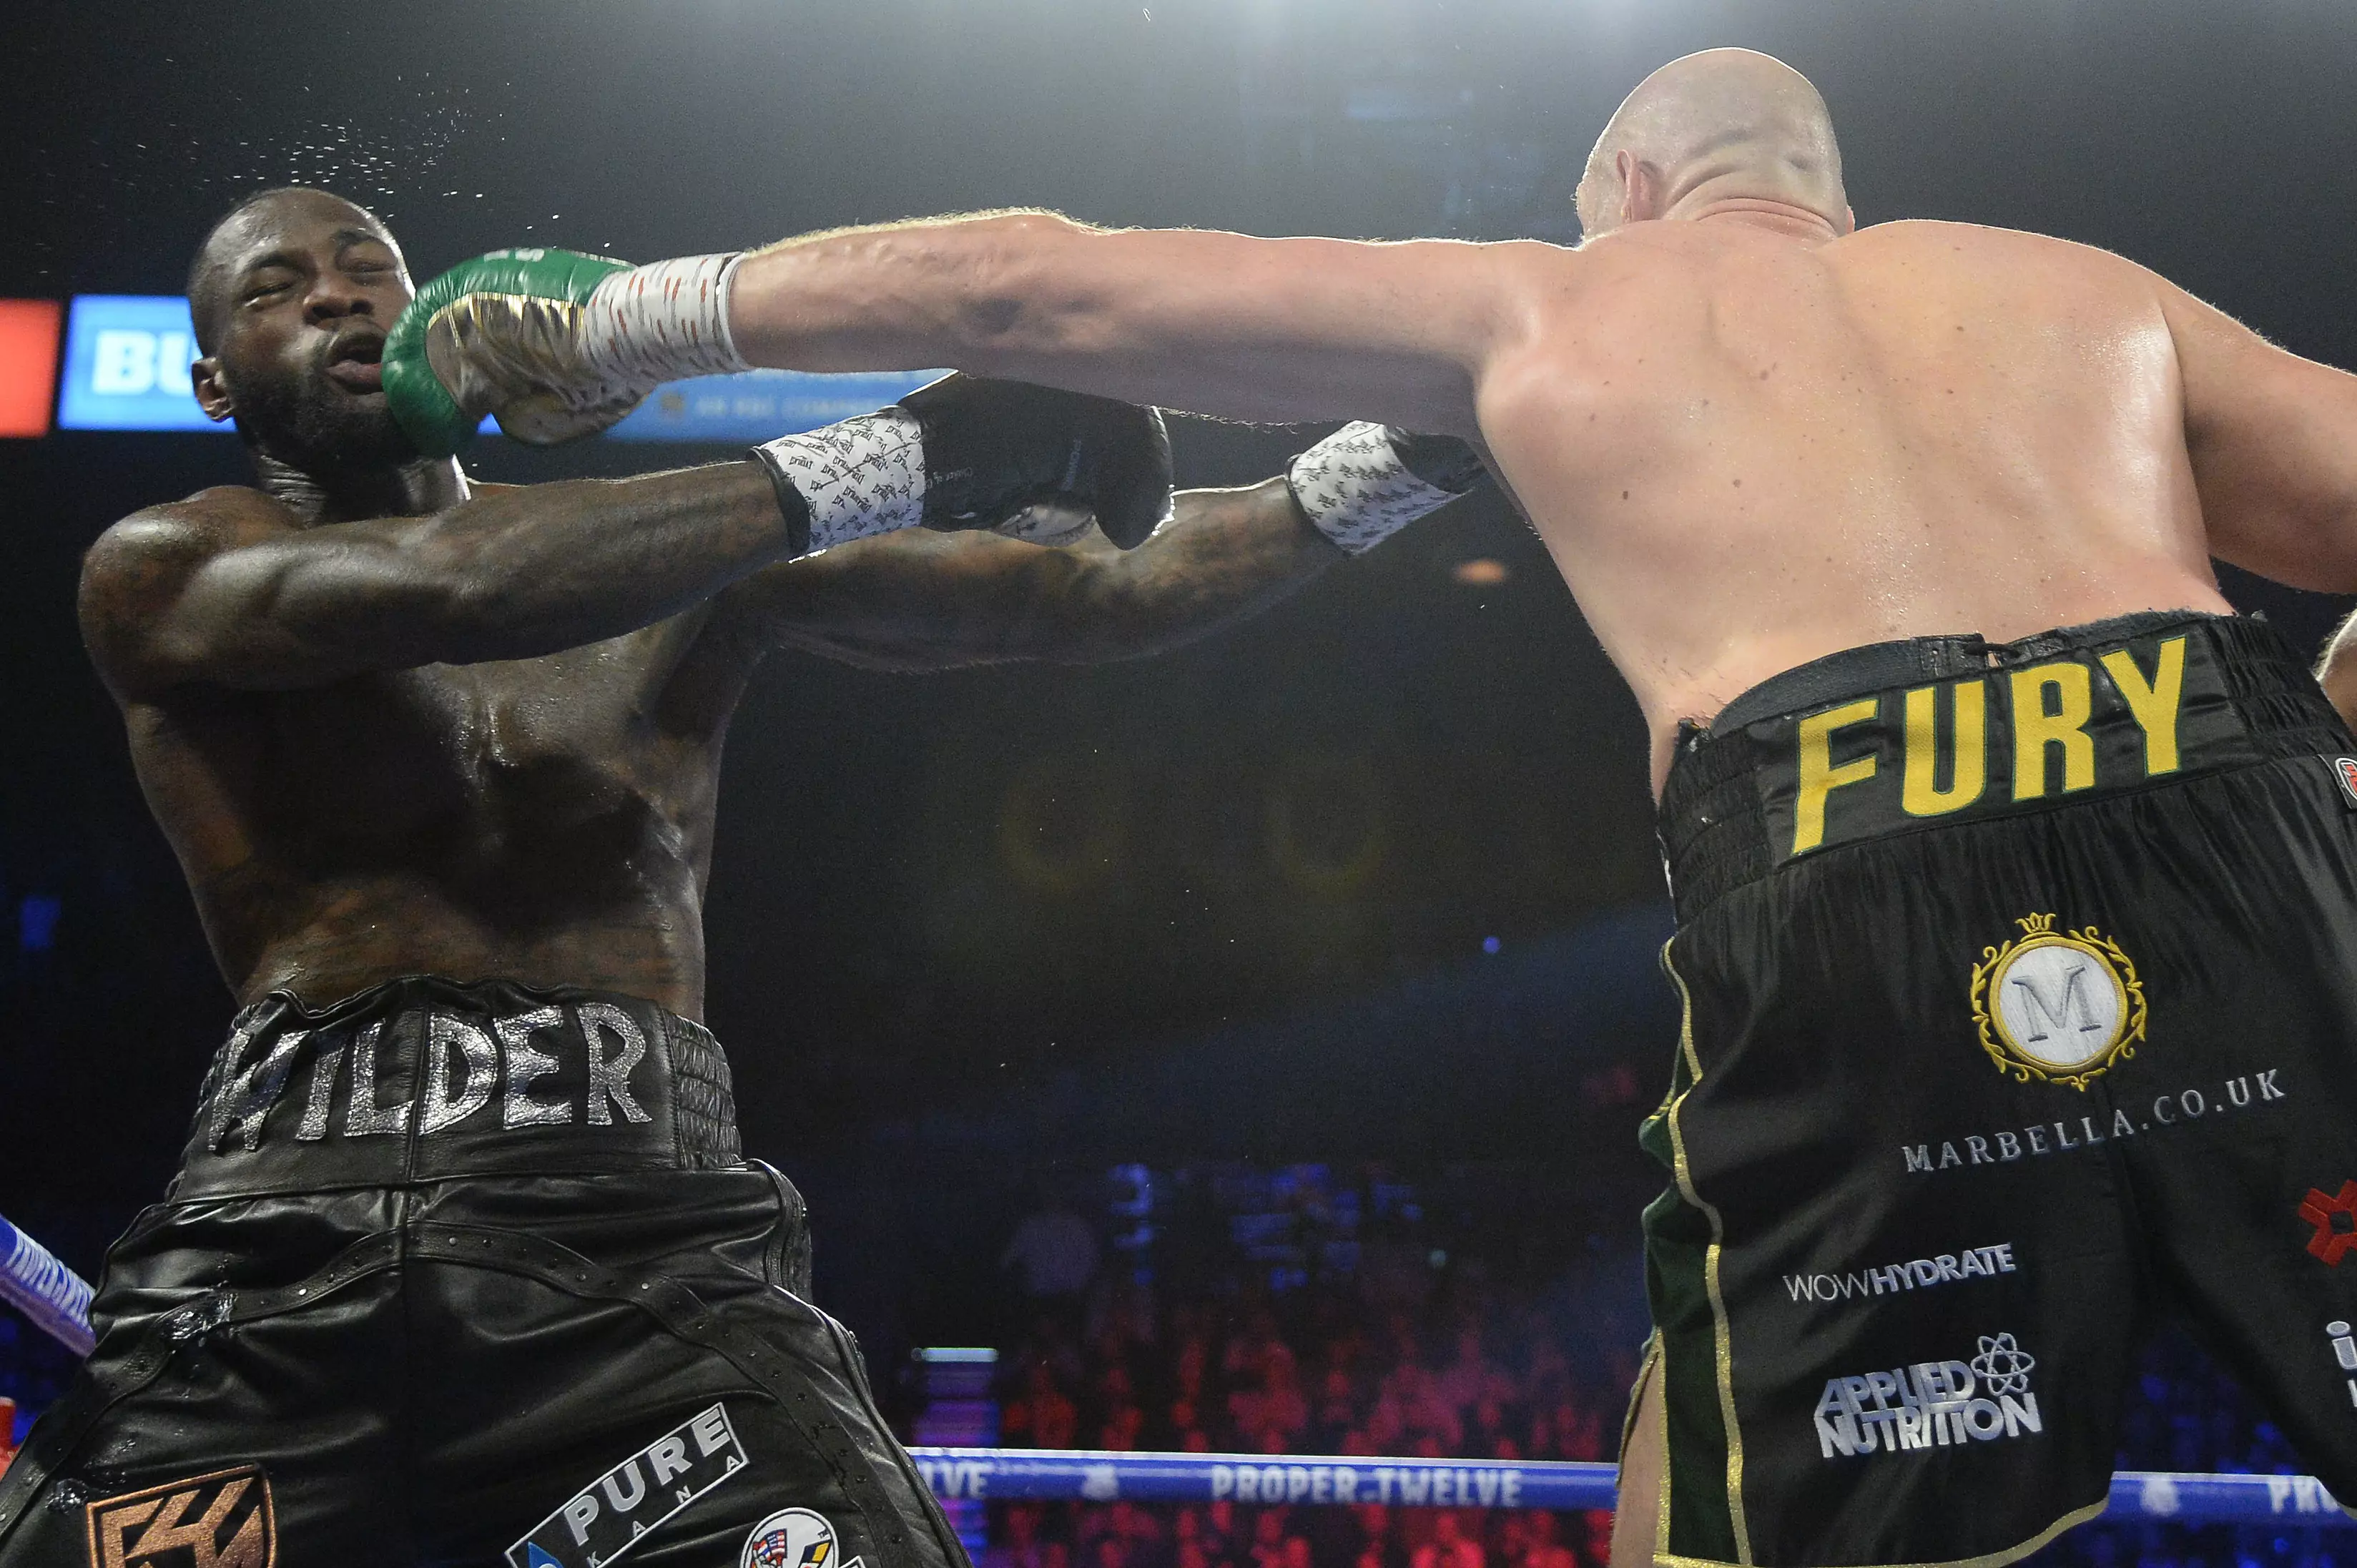 Fury beat Wilder to clinch the WBC title back in February.